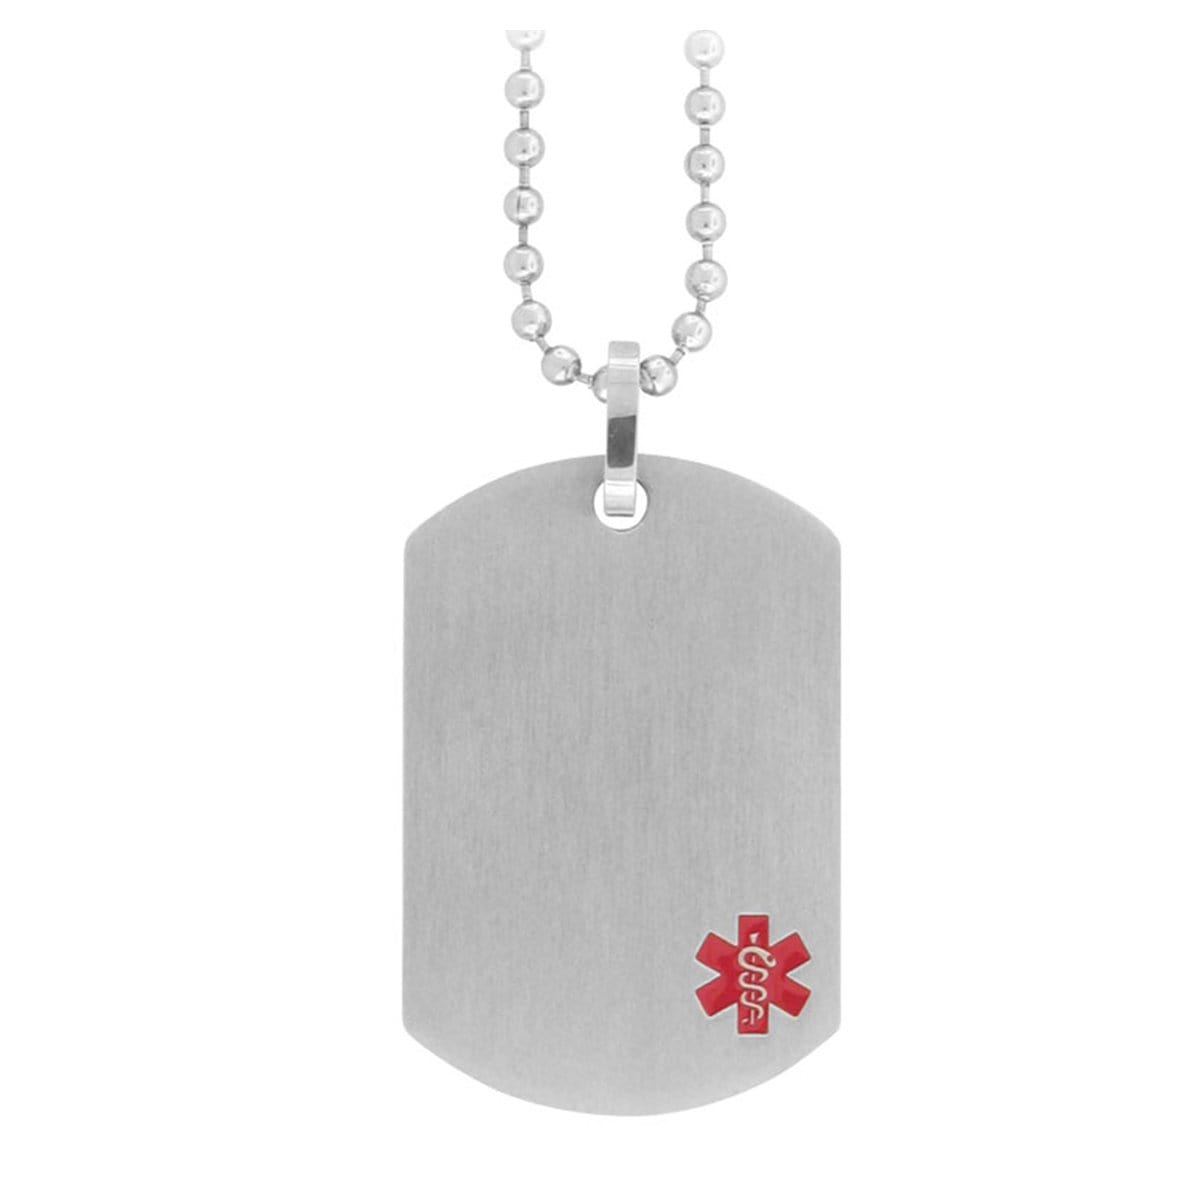 INOX JEWELRY Pendants Red and Silver Tone Stainless Steel Engraveable Medical ID Pendant and Chain SSPMA1SNK